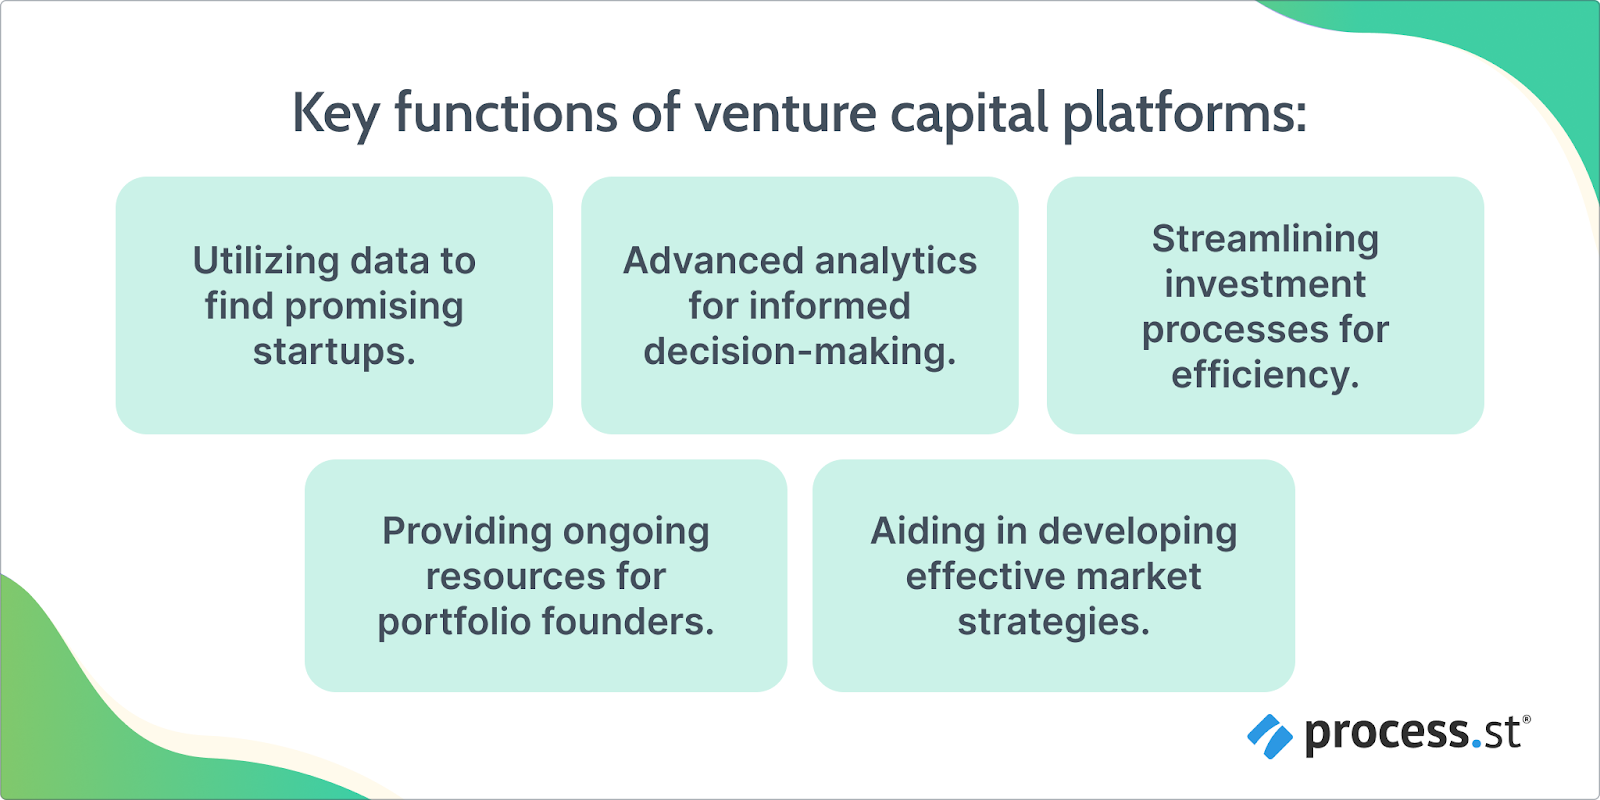 Image showing the key functions of a venture capital platform